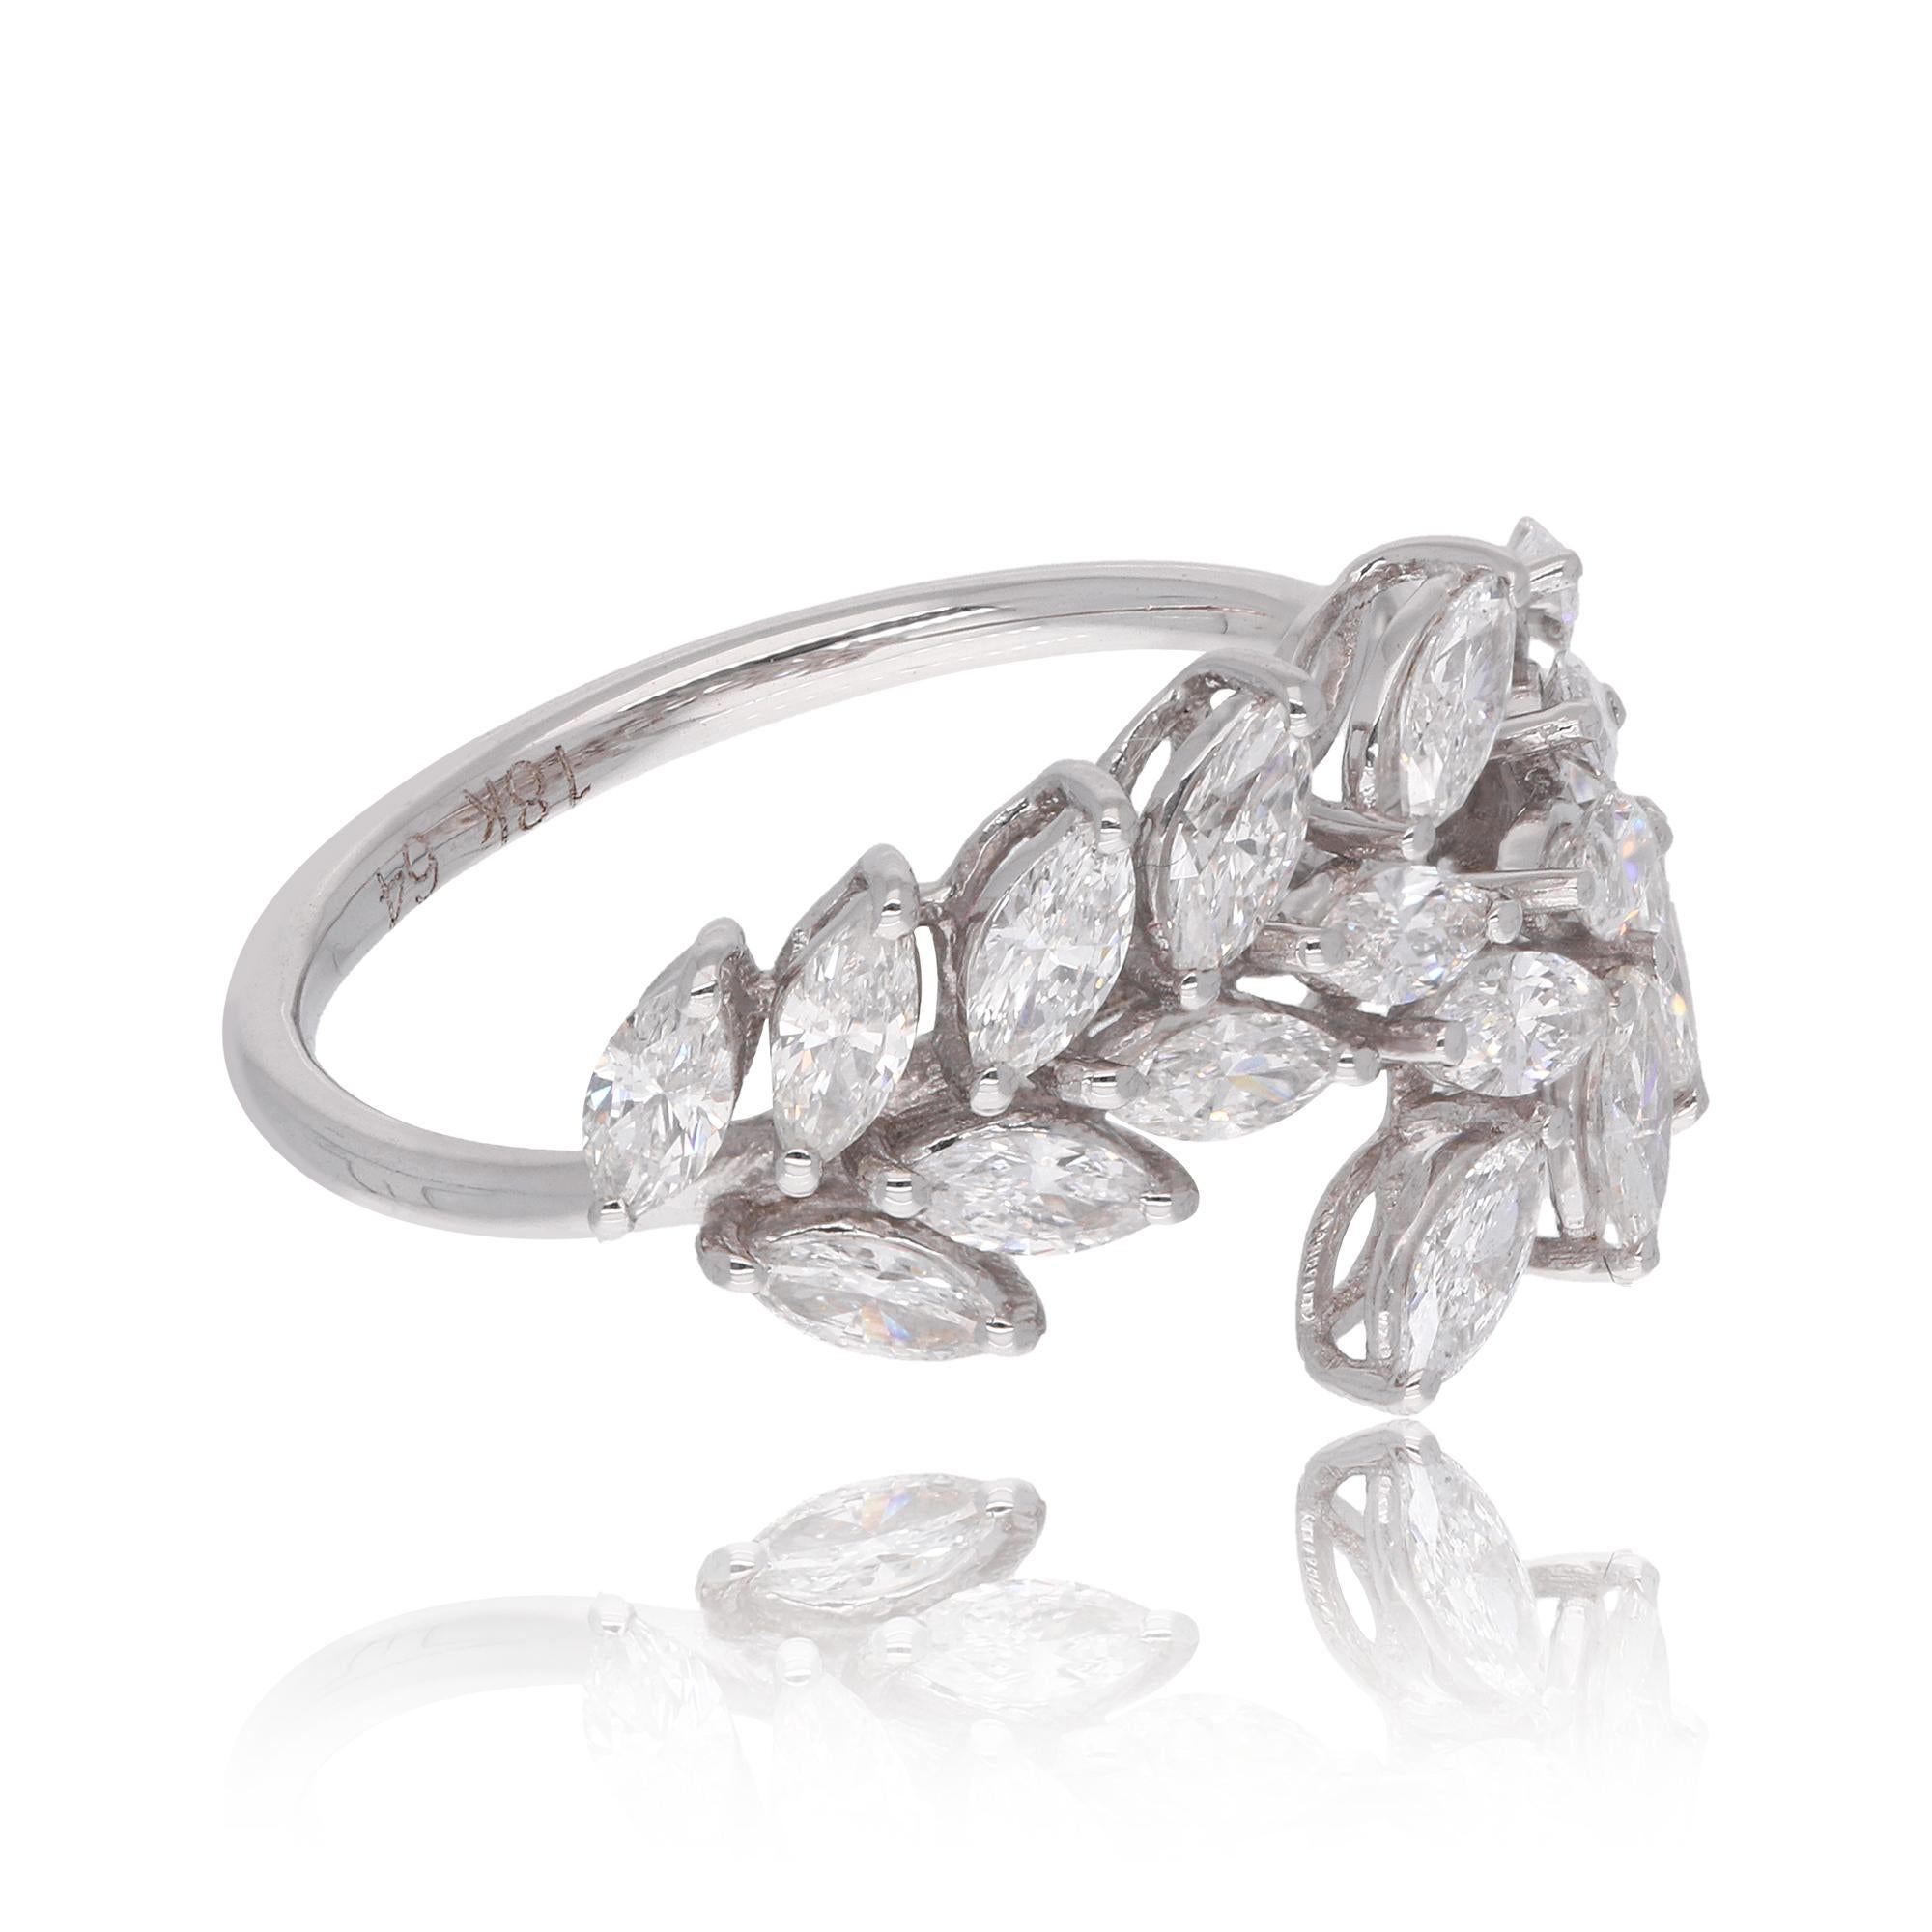 For Sale:  1.34 Carat SI Clarity HI Color Marquise Diamond Leaf Ring 18 Karat White Gold 2